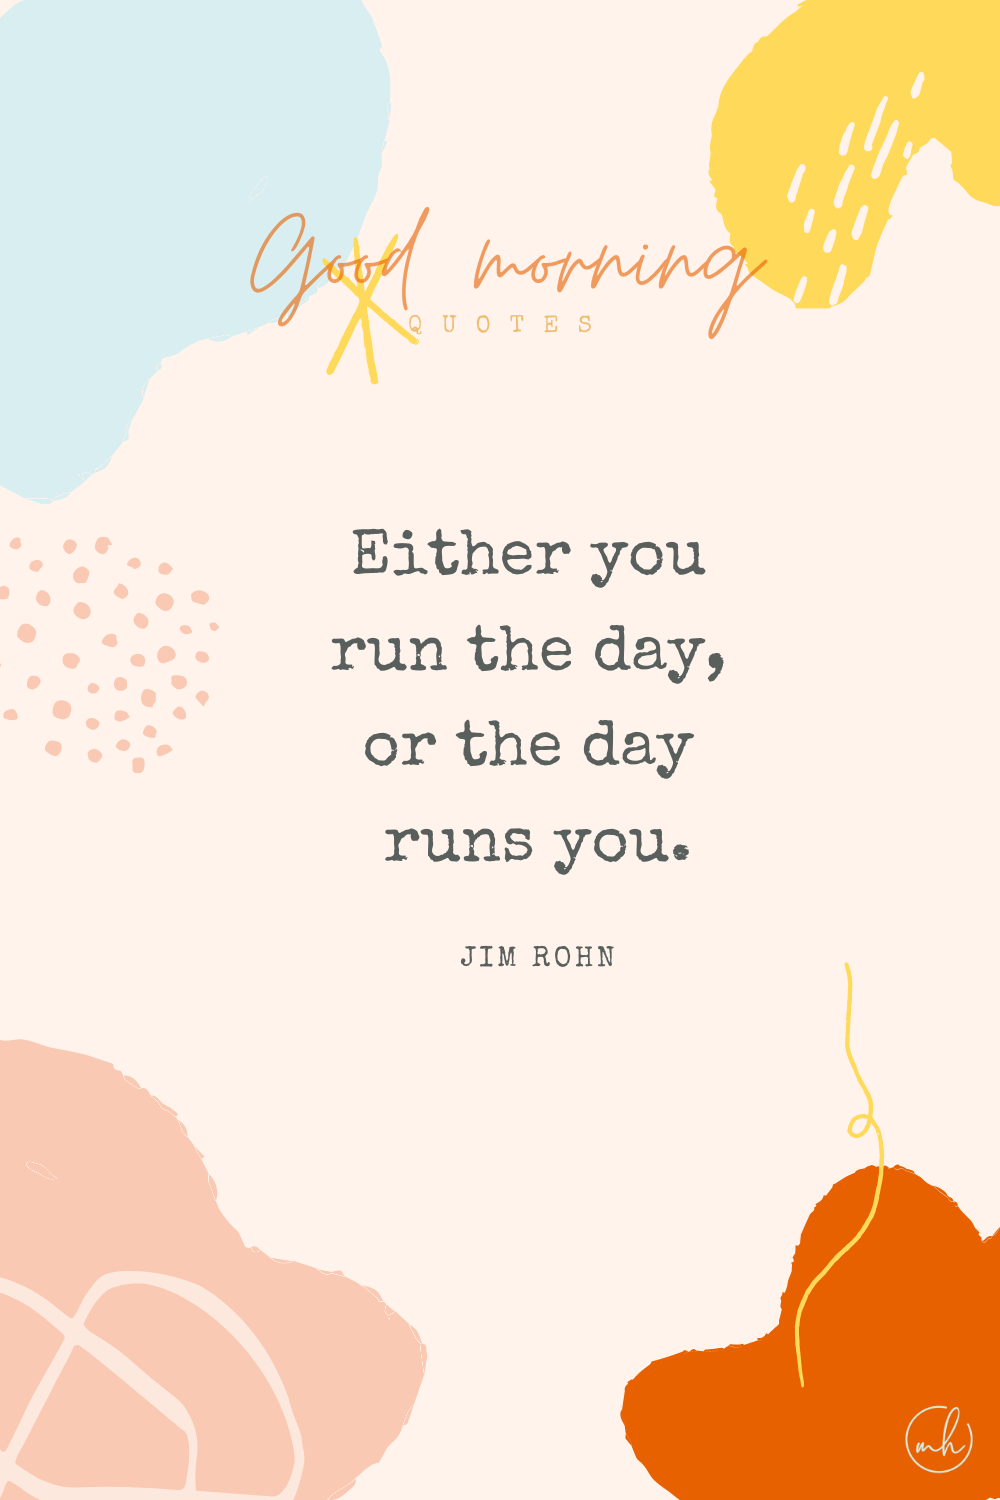 "Either you run the day, or the day runs you." - Jim Rohn